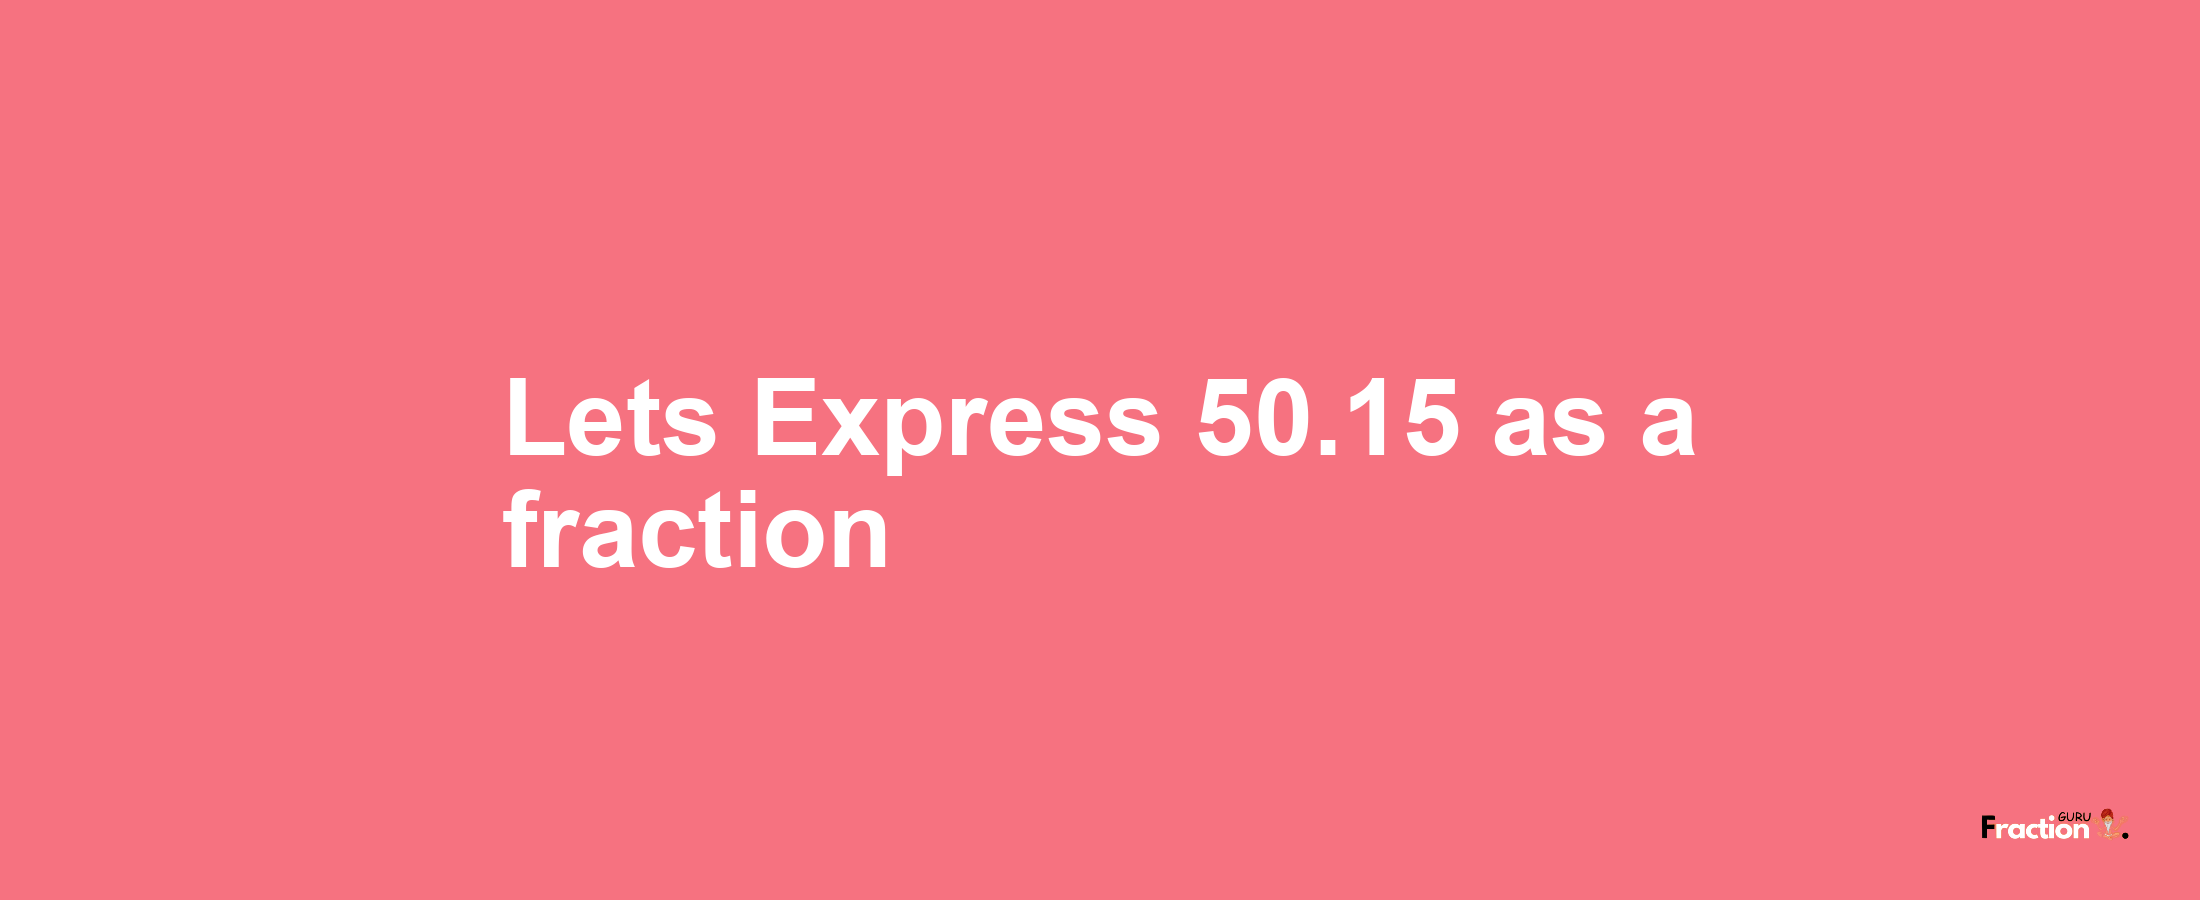 Lets Express 50.15 as afraction